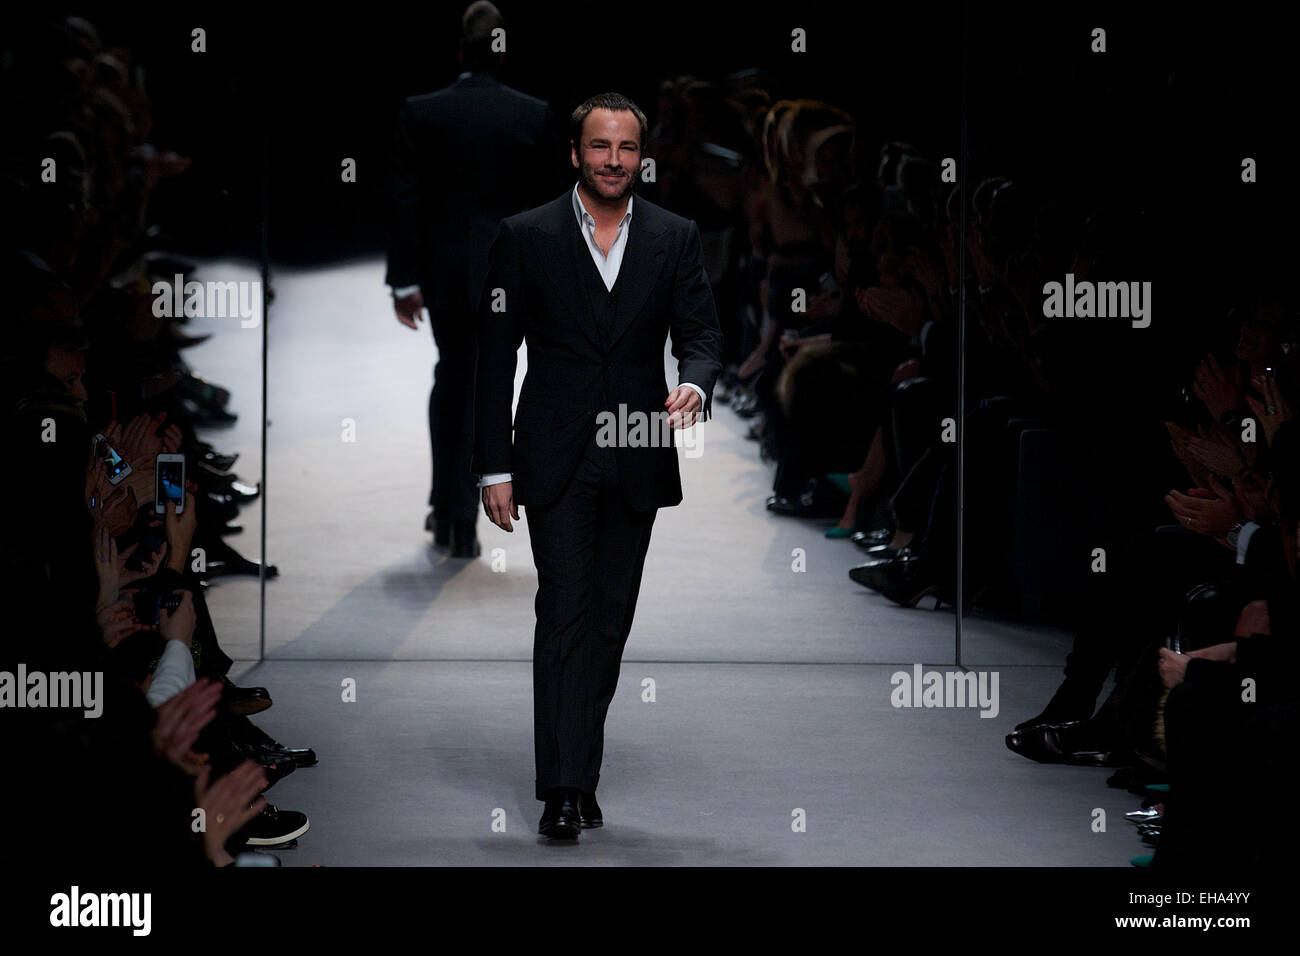 UNITED KINGDOM, London : Designer Tom Ford thanks the audience at the end of his shown during the 2014 Autumn / Winter London Fashion Week in London on February 17, 2014. Stock Photo